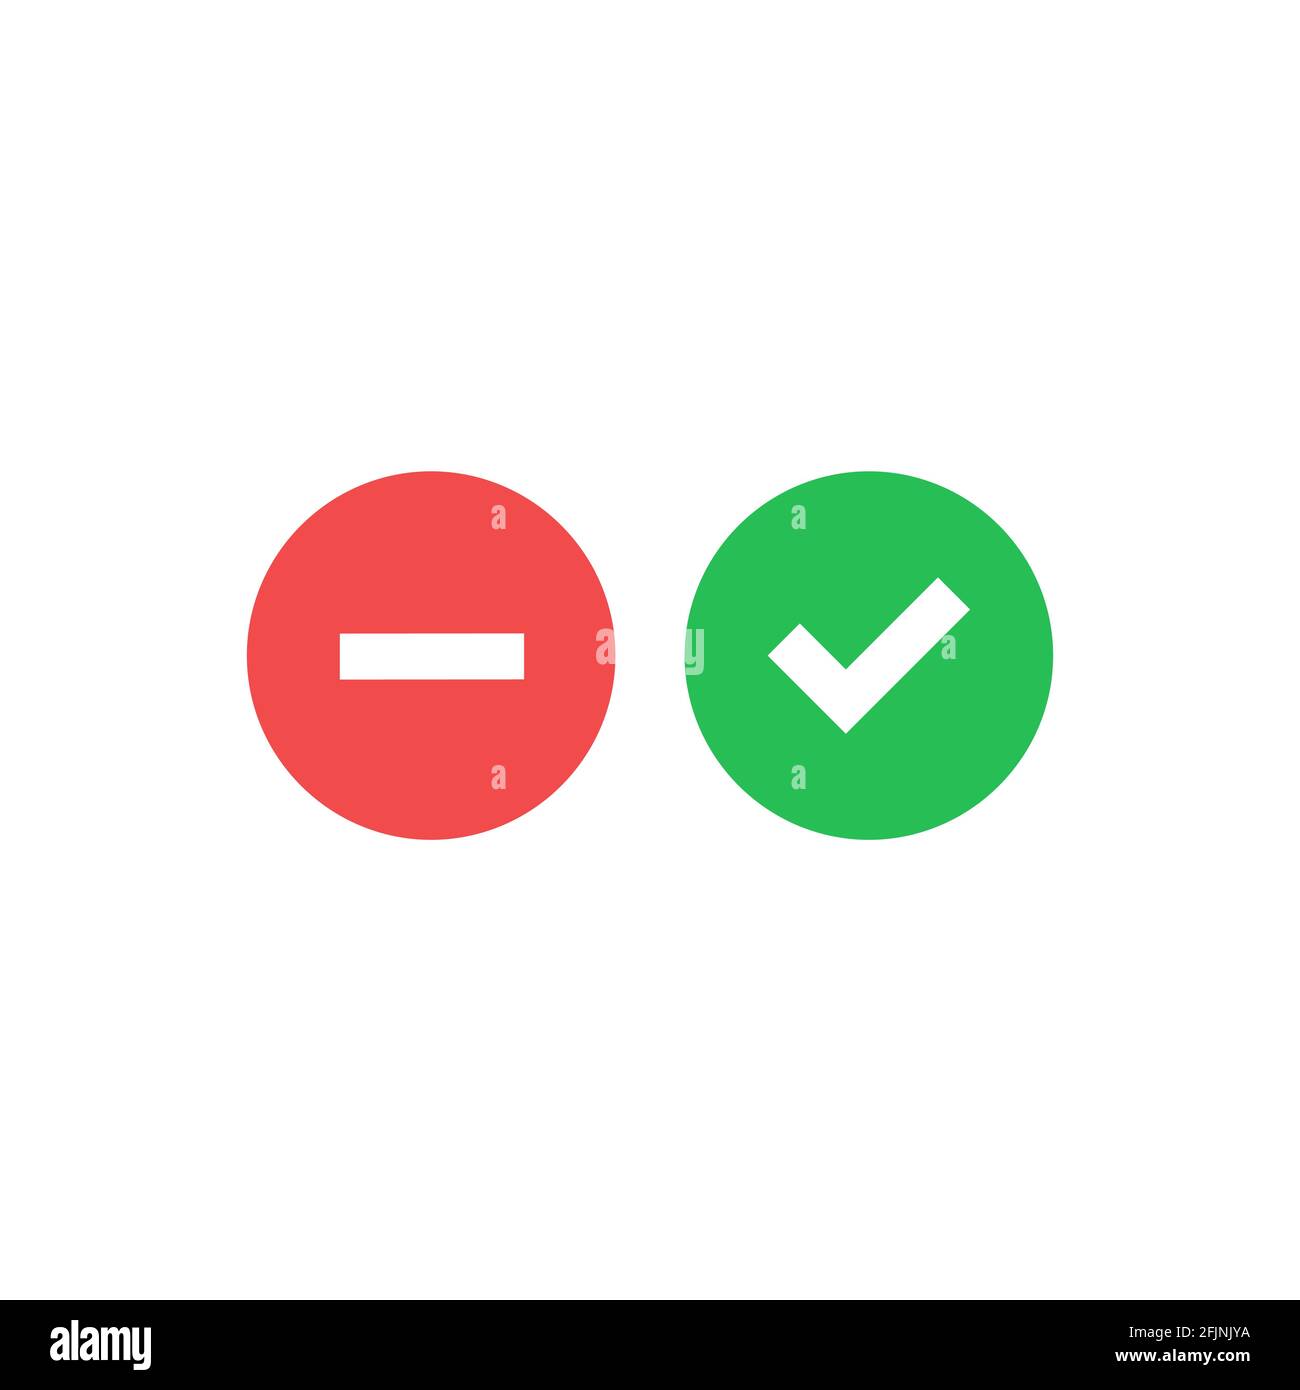 Check Marks Red Cross Icon Simple Vector Stock Illustration